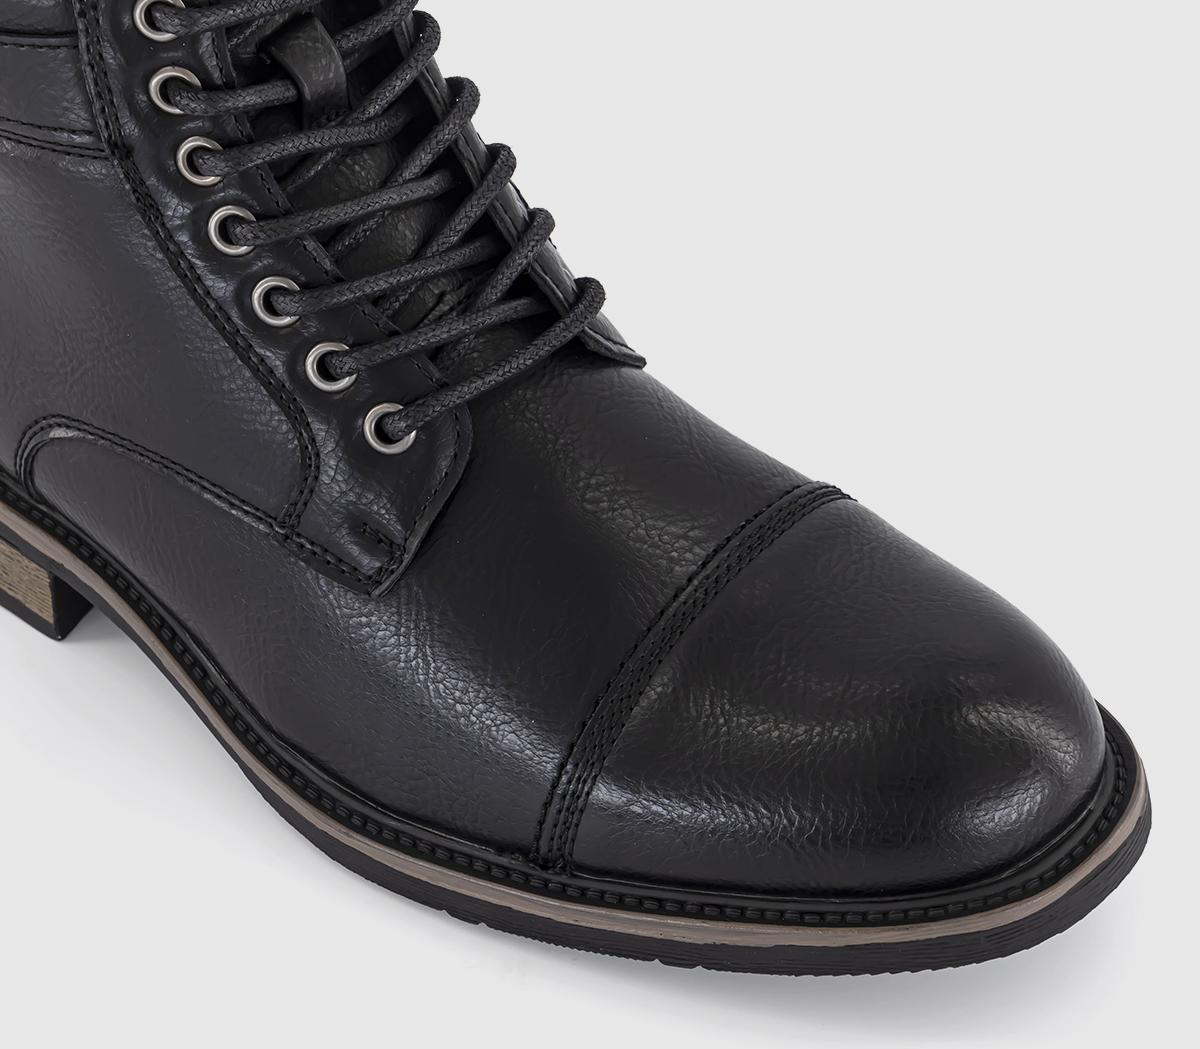 OFFICE Bellamy Borg Lined Buckle Boots Black - Men’s Boots